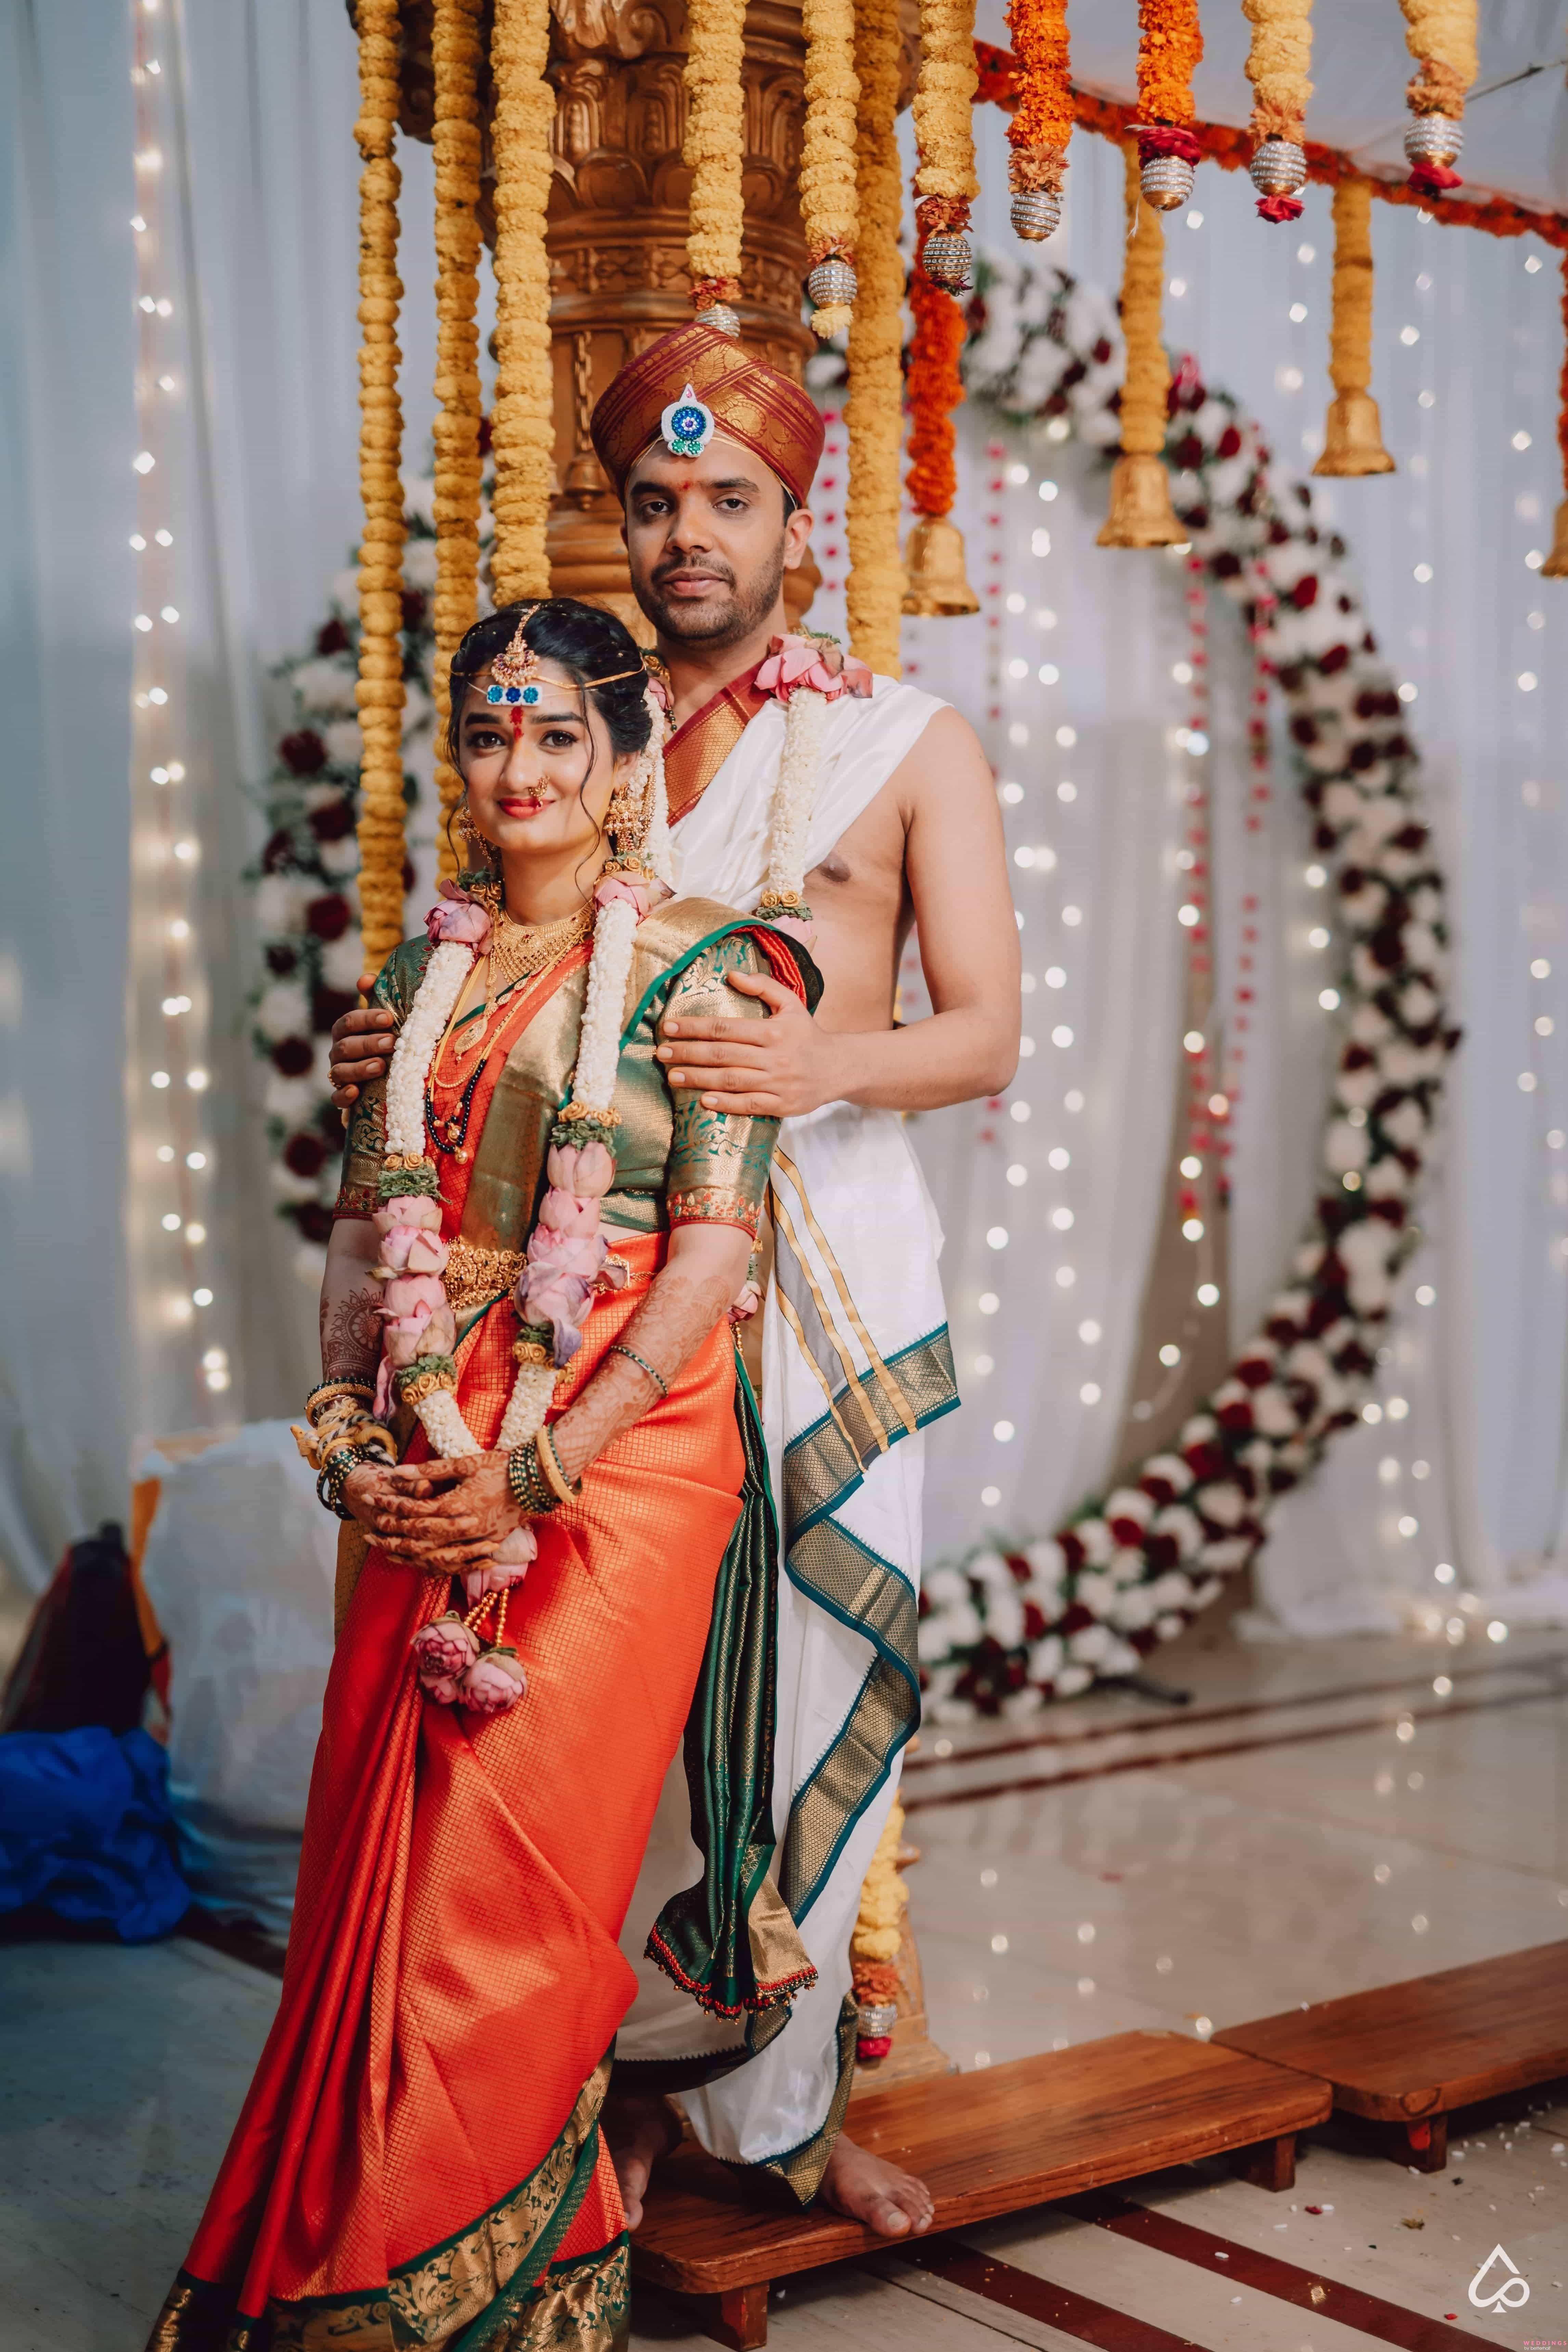 Indian wedding couple Images - Search Images on Everypixel